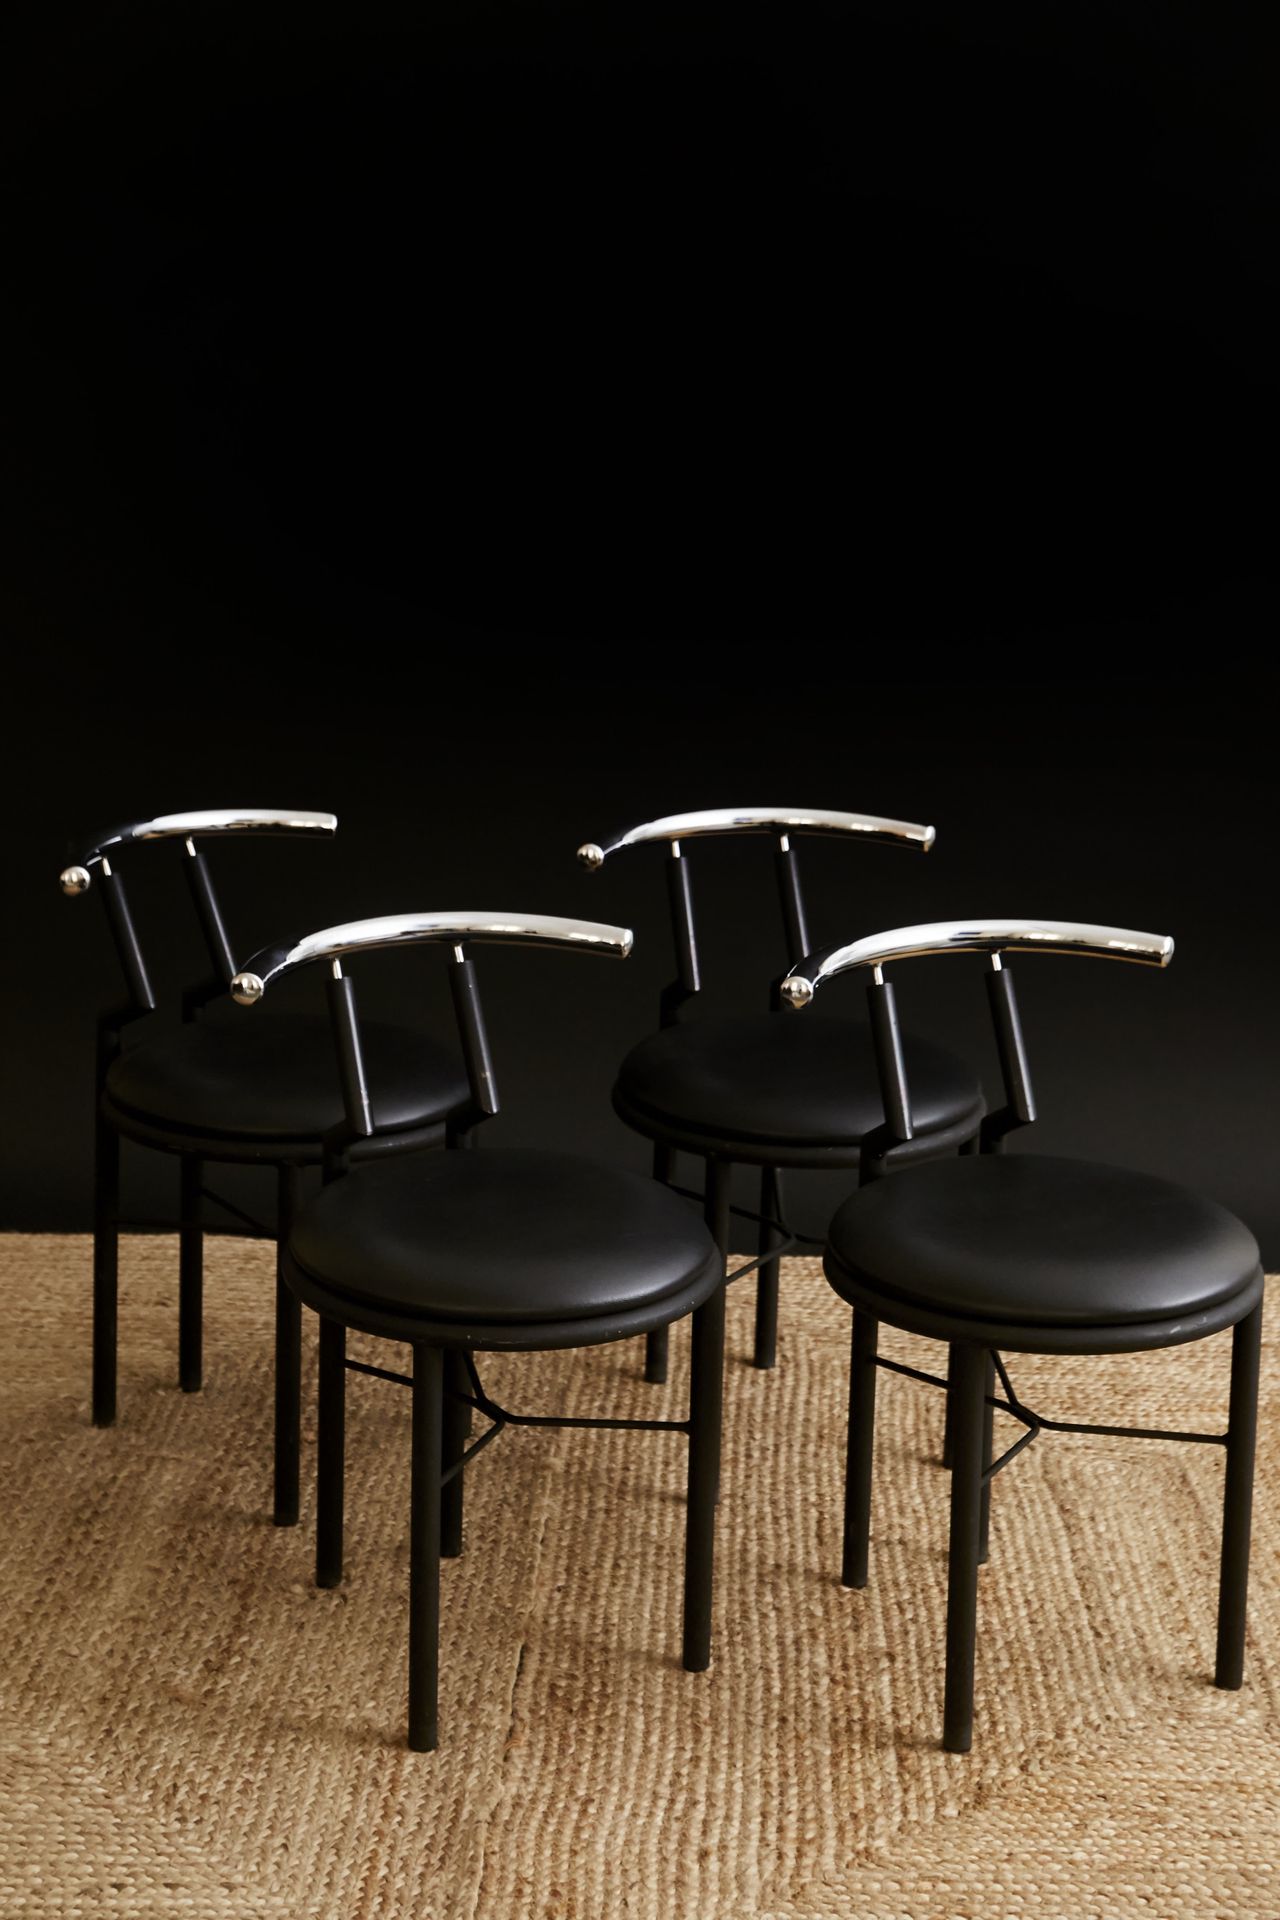 TRAVAIL JAPONAIS Suite of four chairs---"---
Lacquered metal, chromed metal and &hellip;